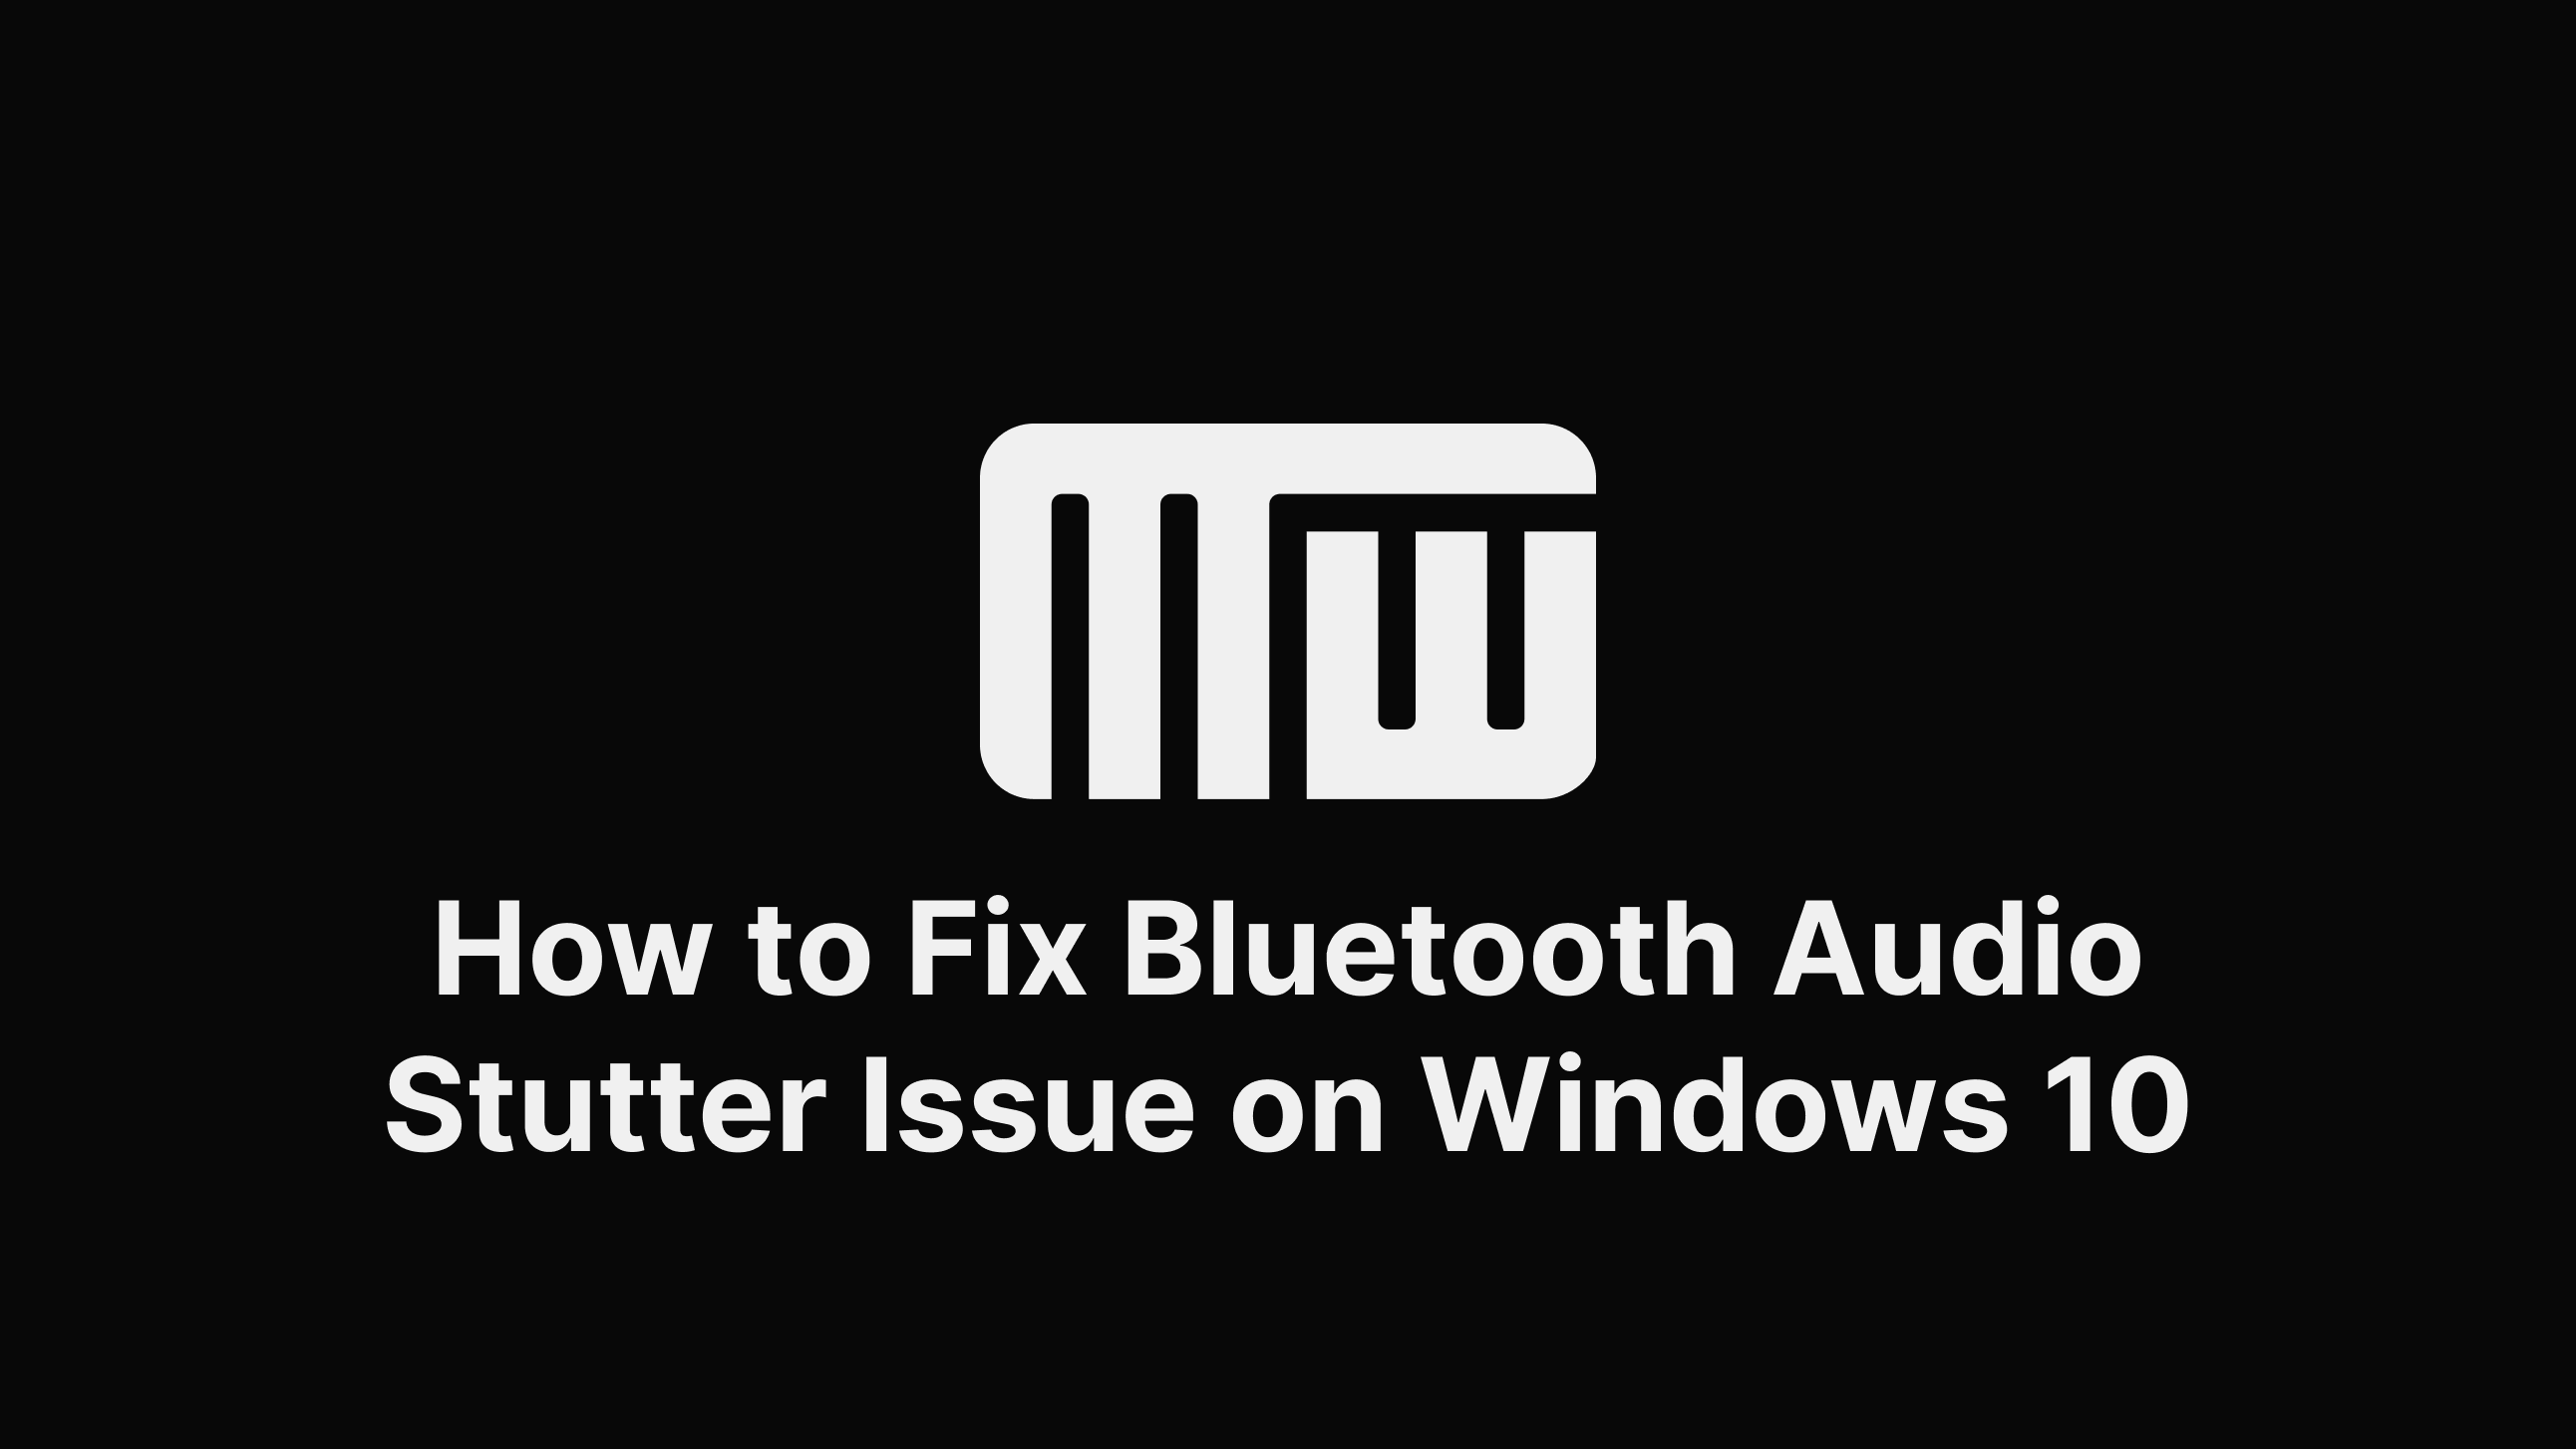 How to Fix Bluetooth Audio Stutter Issue on Windows 10